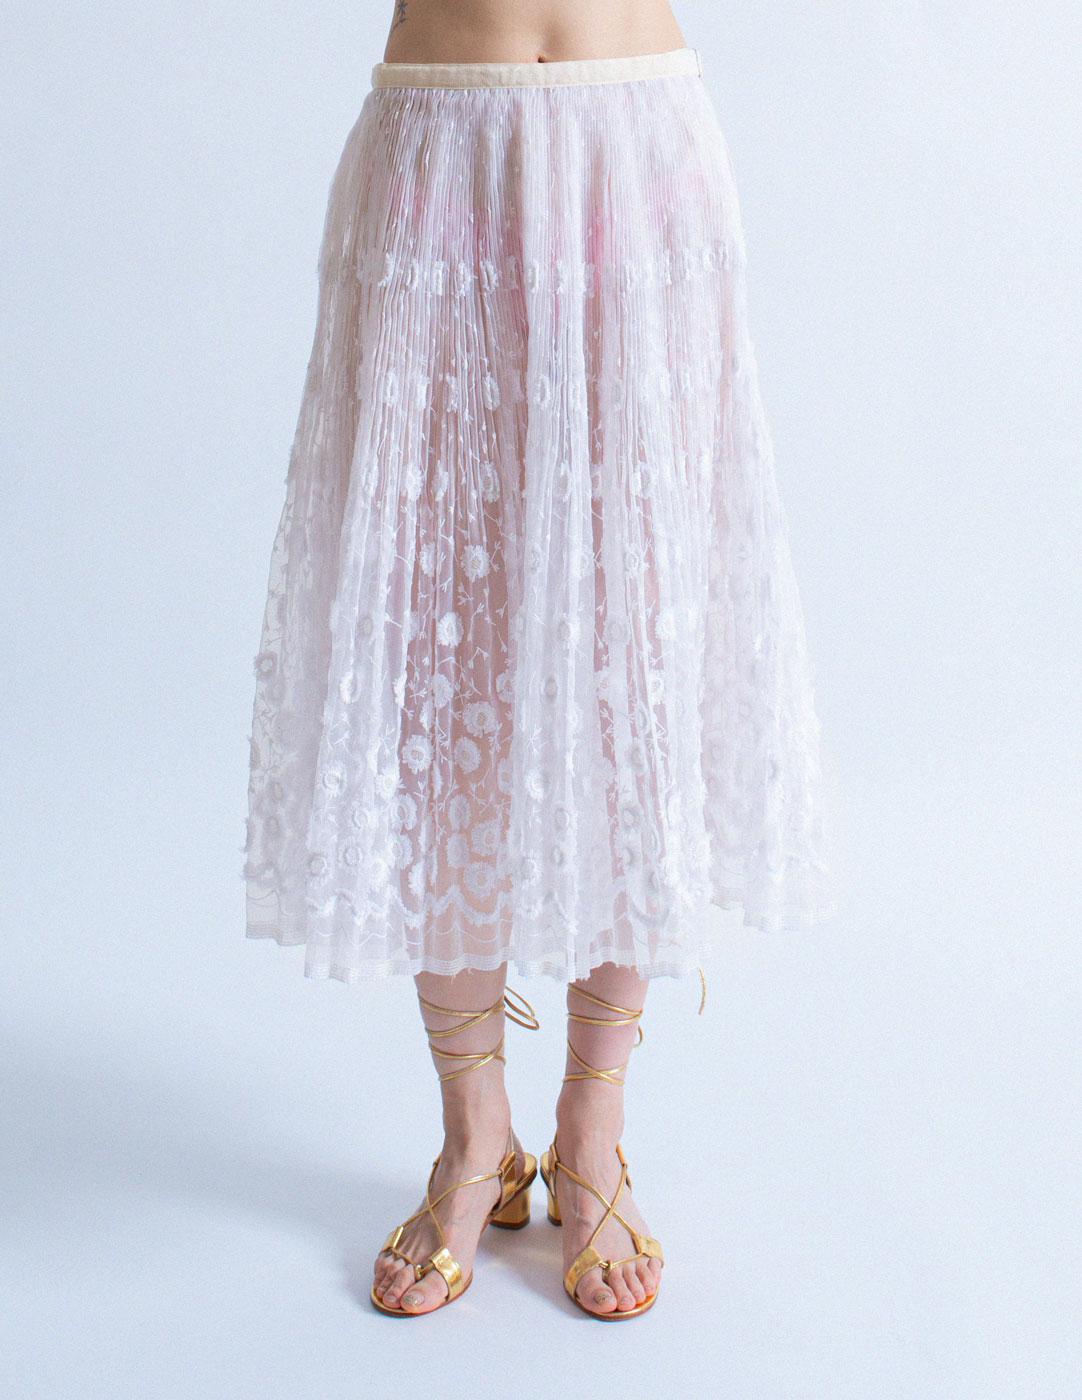 Comme des Garçons embroidered lace pleated skirt front detail